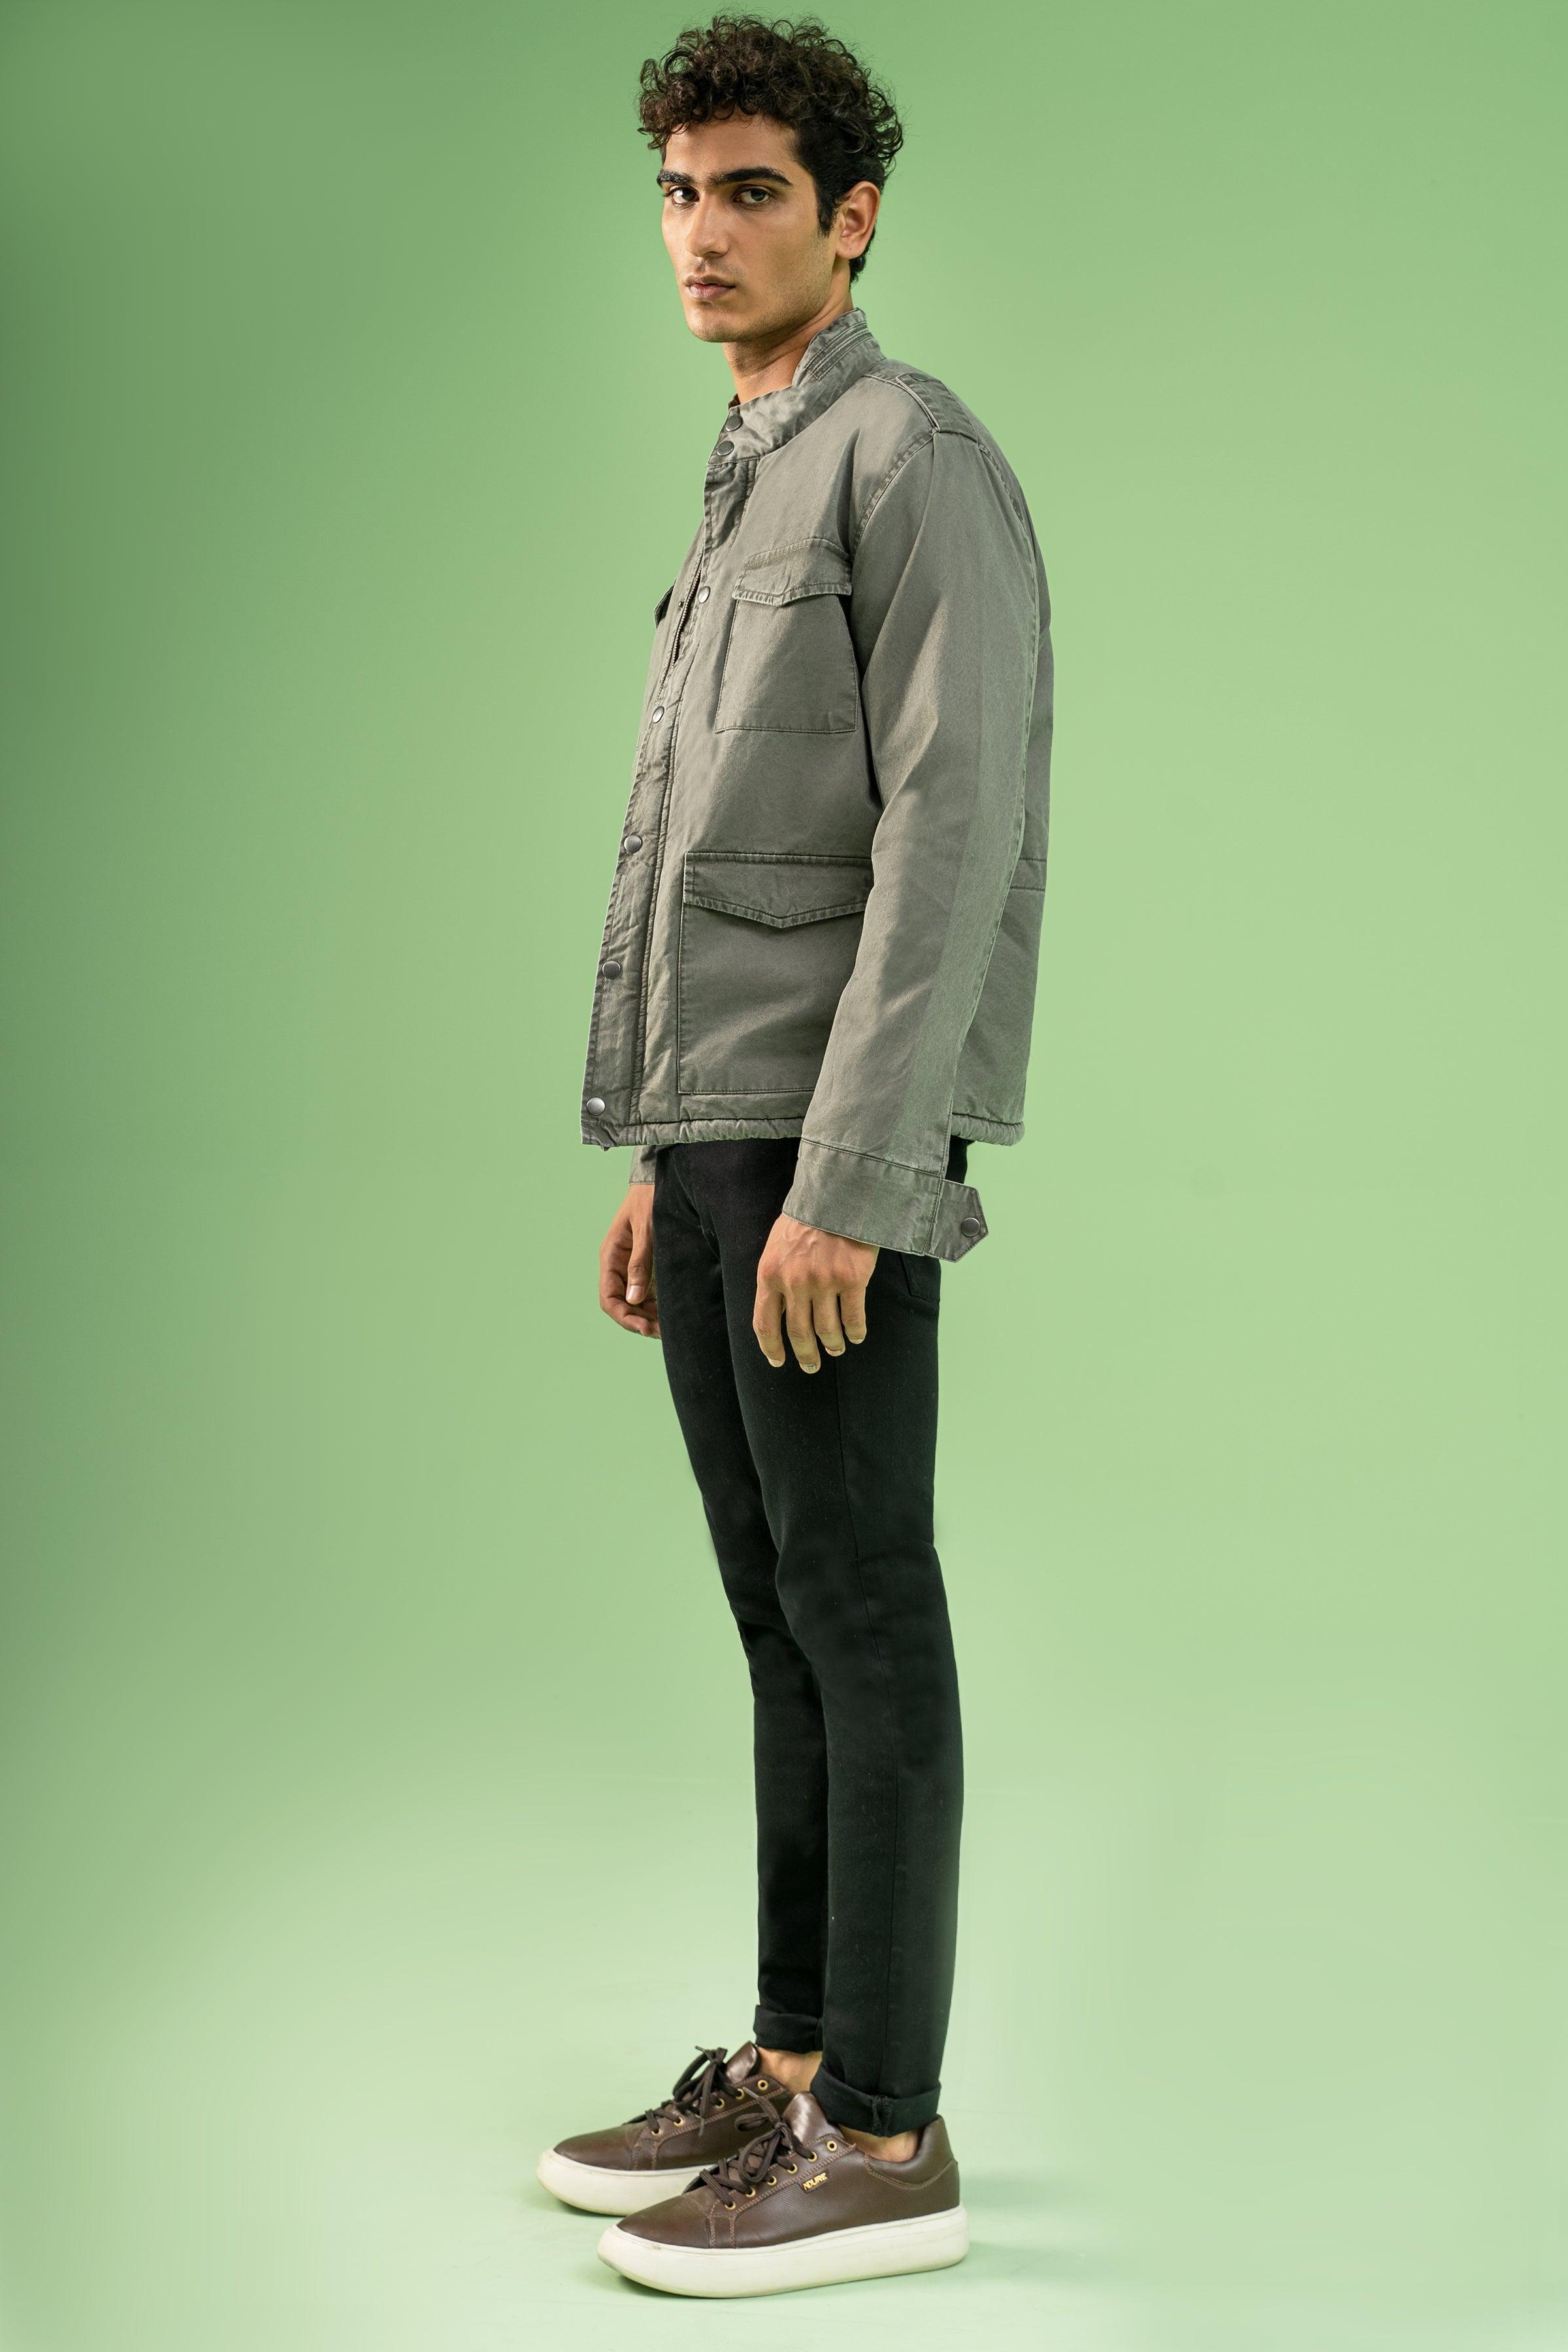 FULL SLEEVE ENZYME WASHED FIELD JACKET OLIVE at Charcoal Clothing